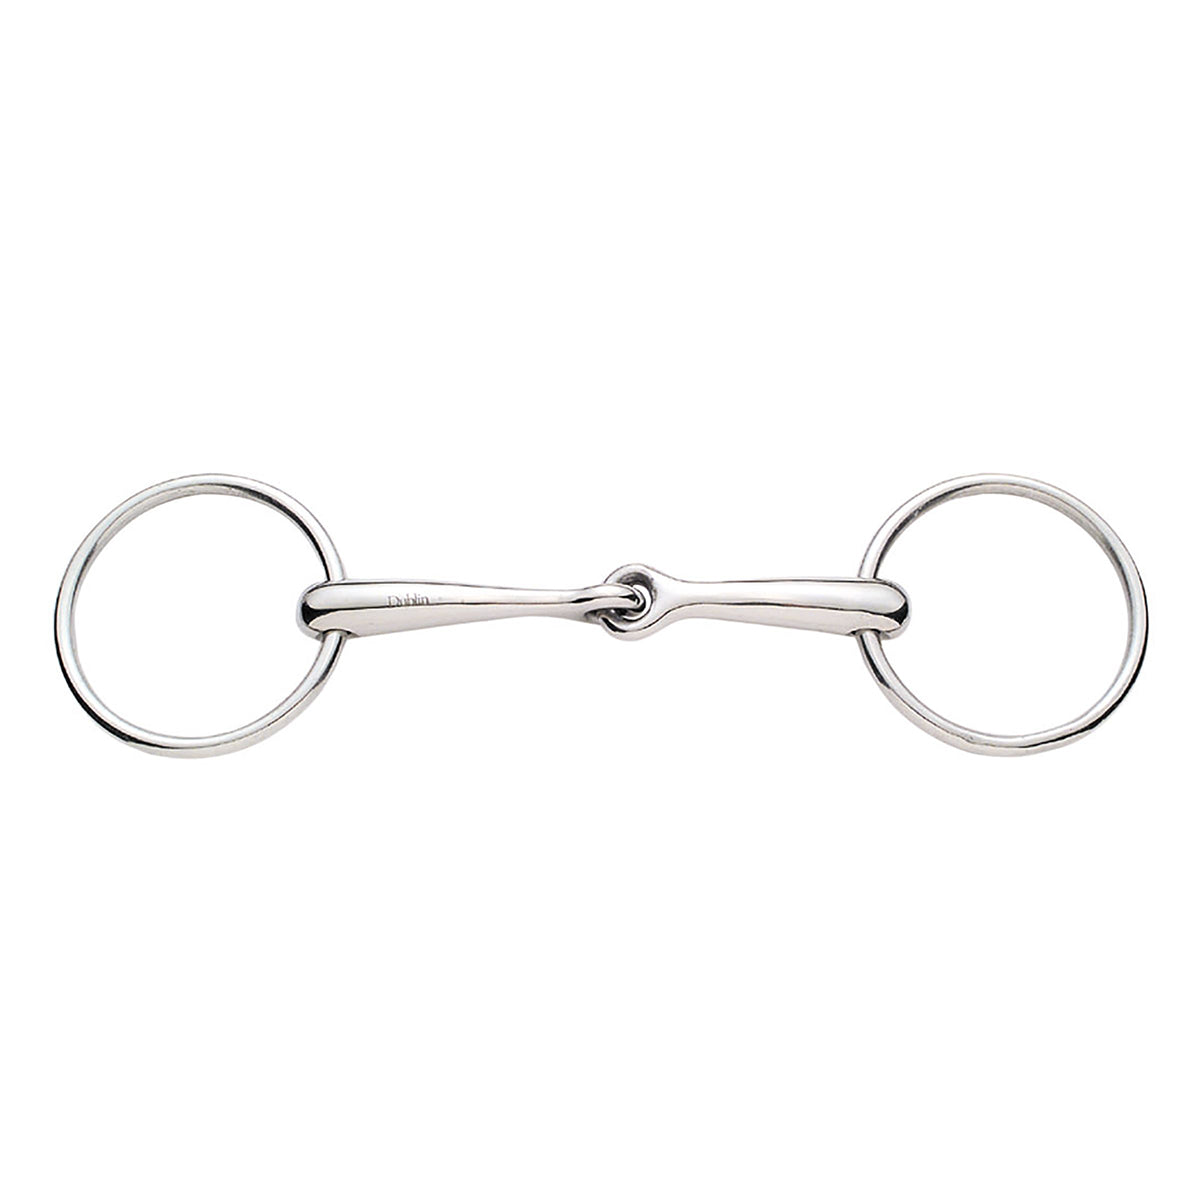 Korsteel Stainless Steel Solid Mouth 16MM Loose Ring Snaffle Bit